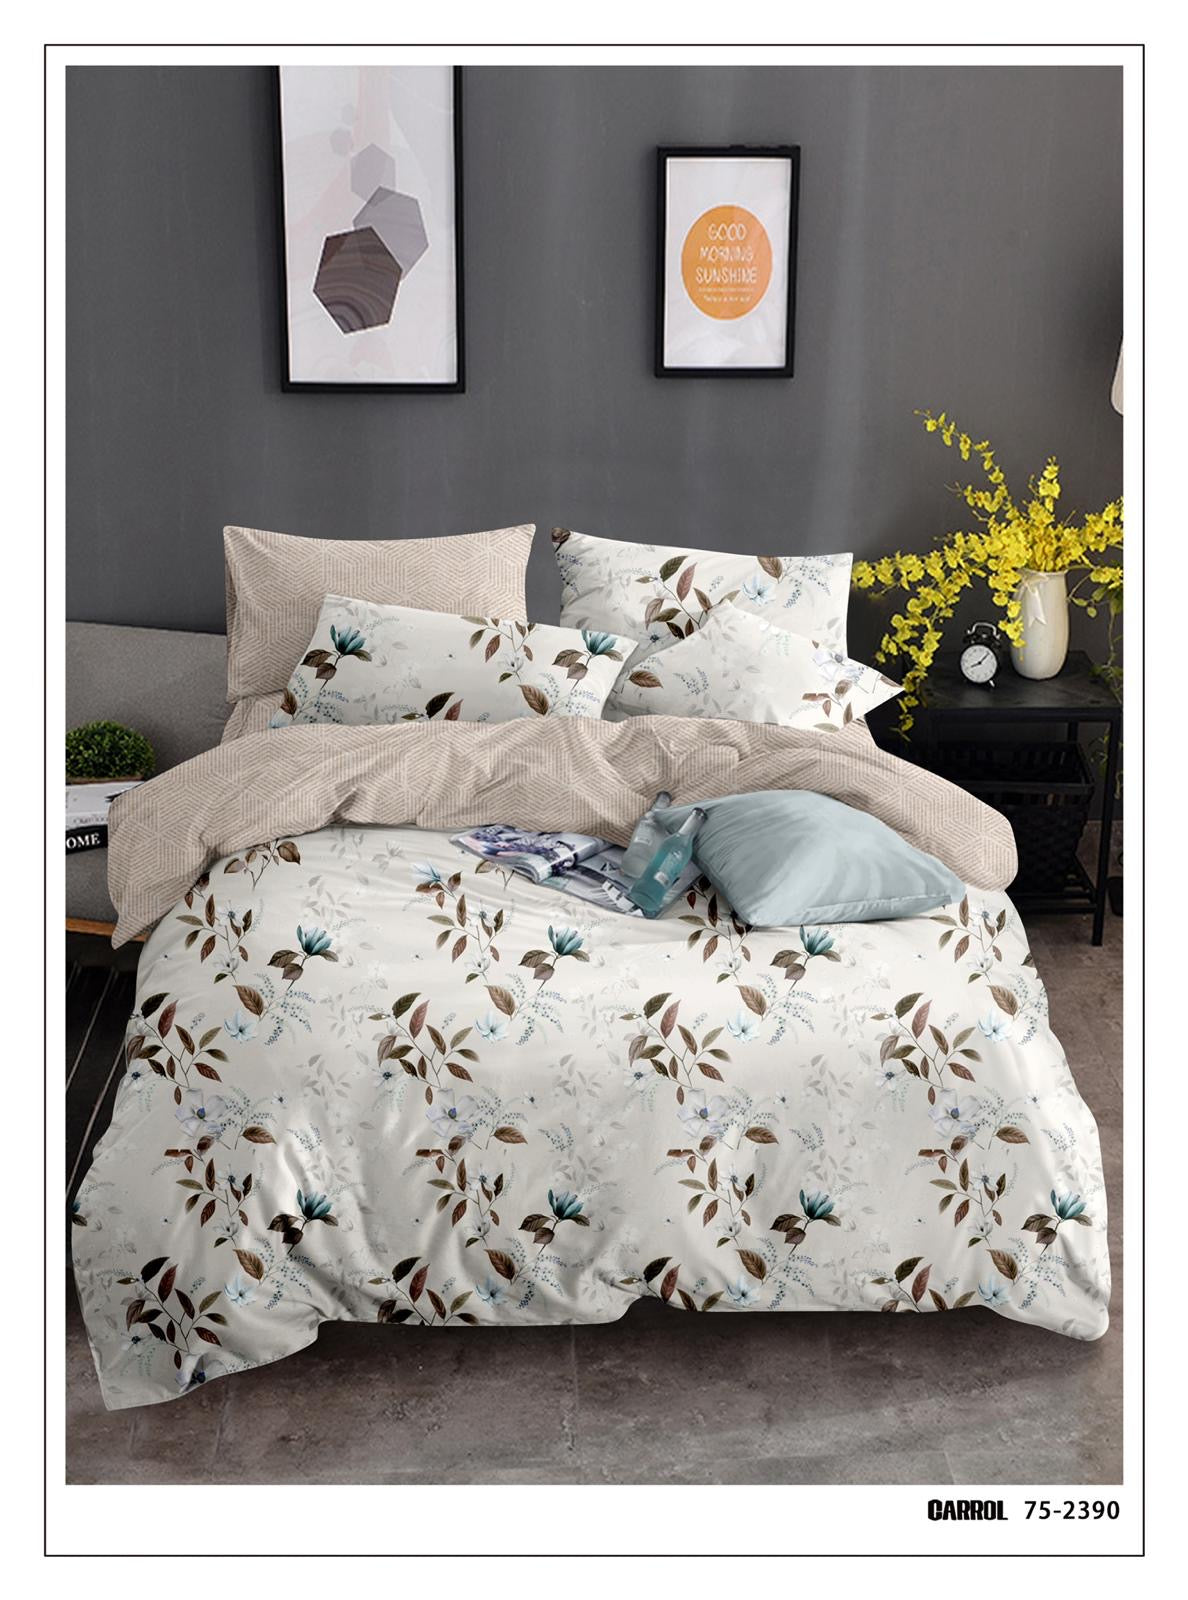 Light weight bedspread for Summer season - AC Quilt 6 pieces set - 220 x 240cm king size